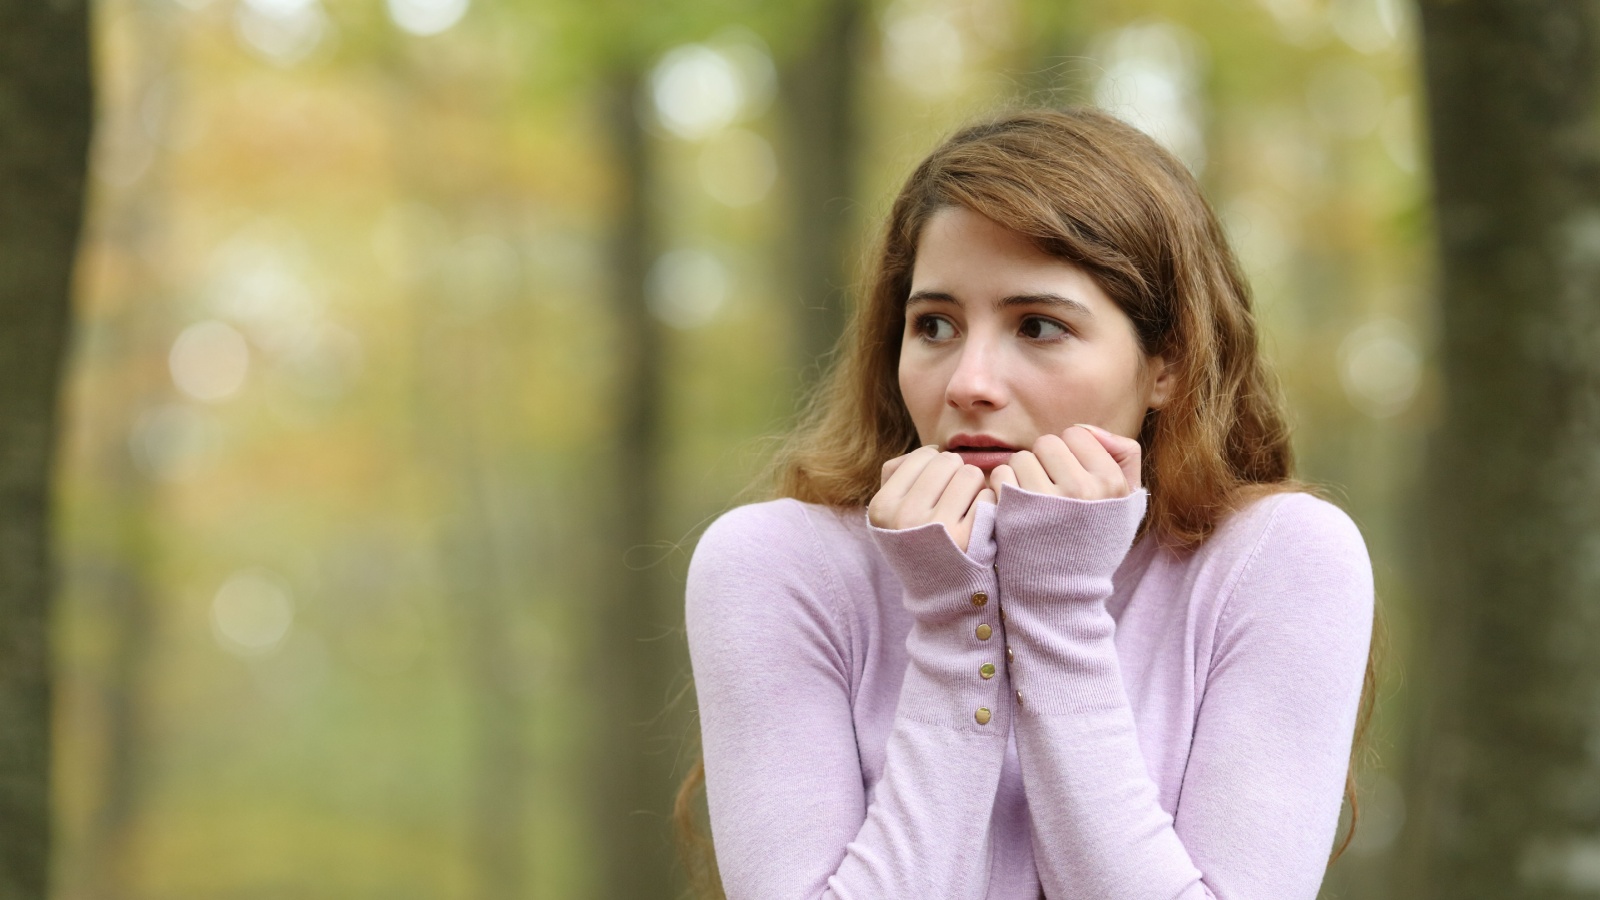 Scared woman looking at side walking alone in a park, potential threat